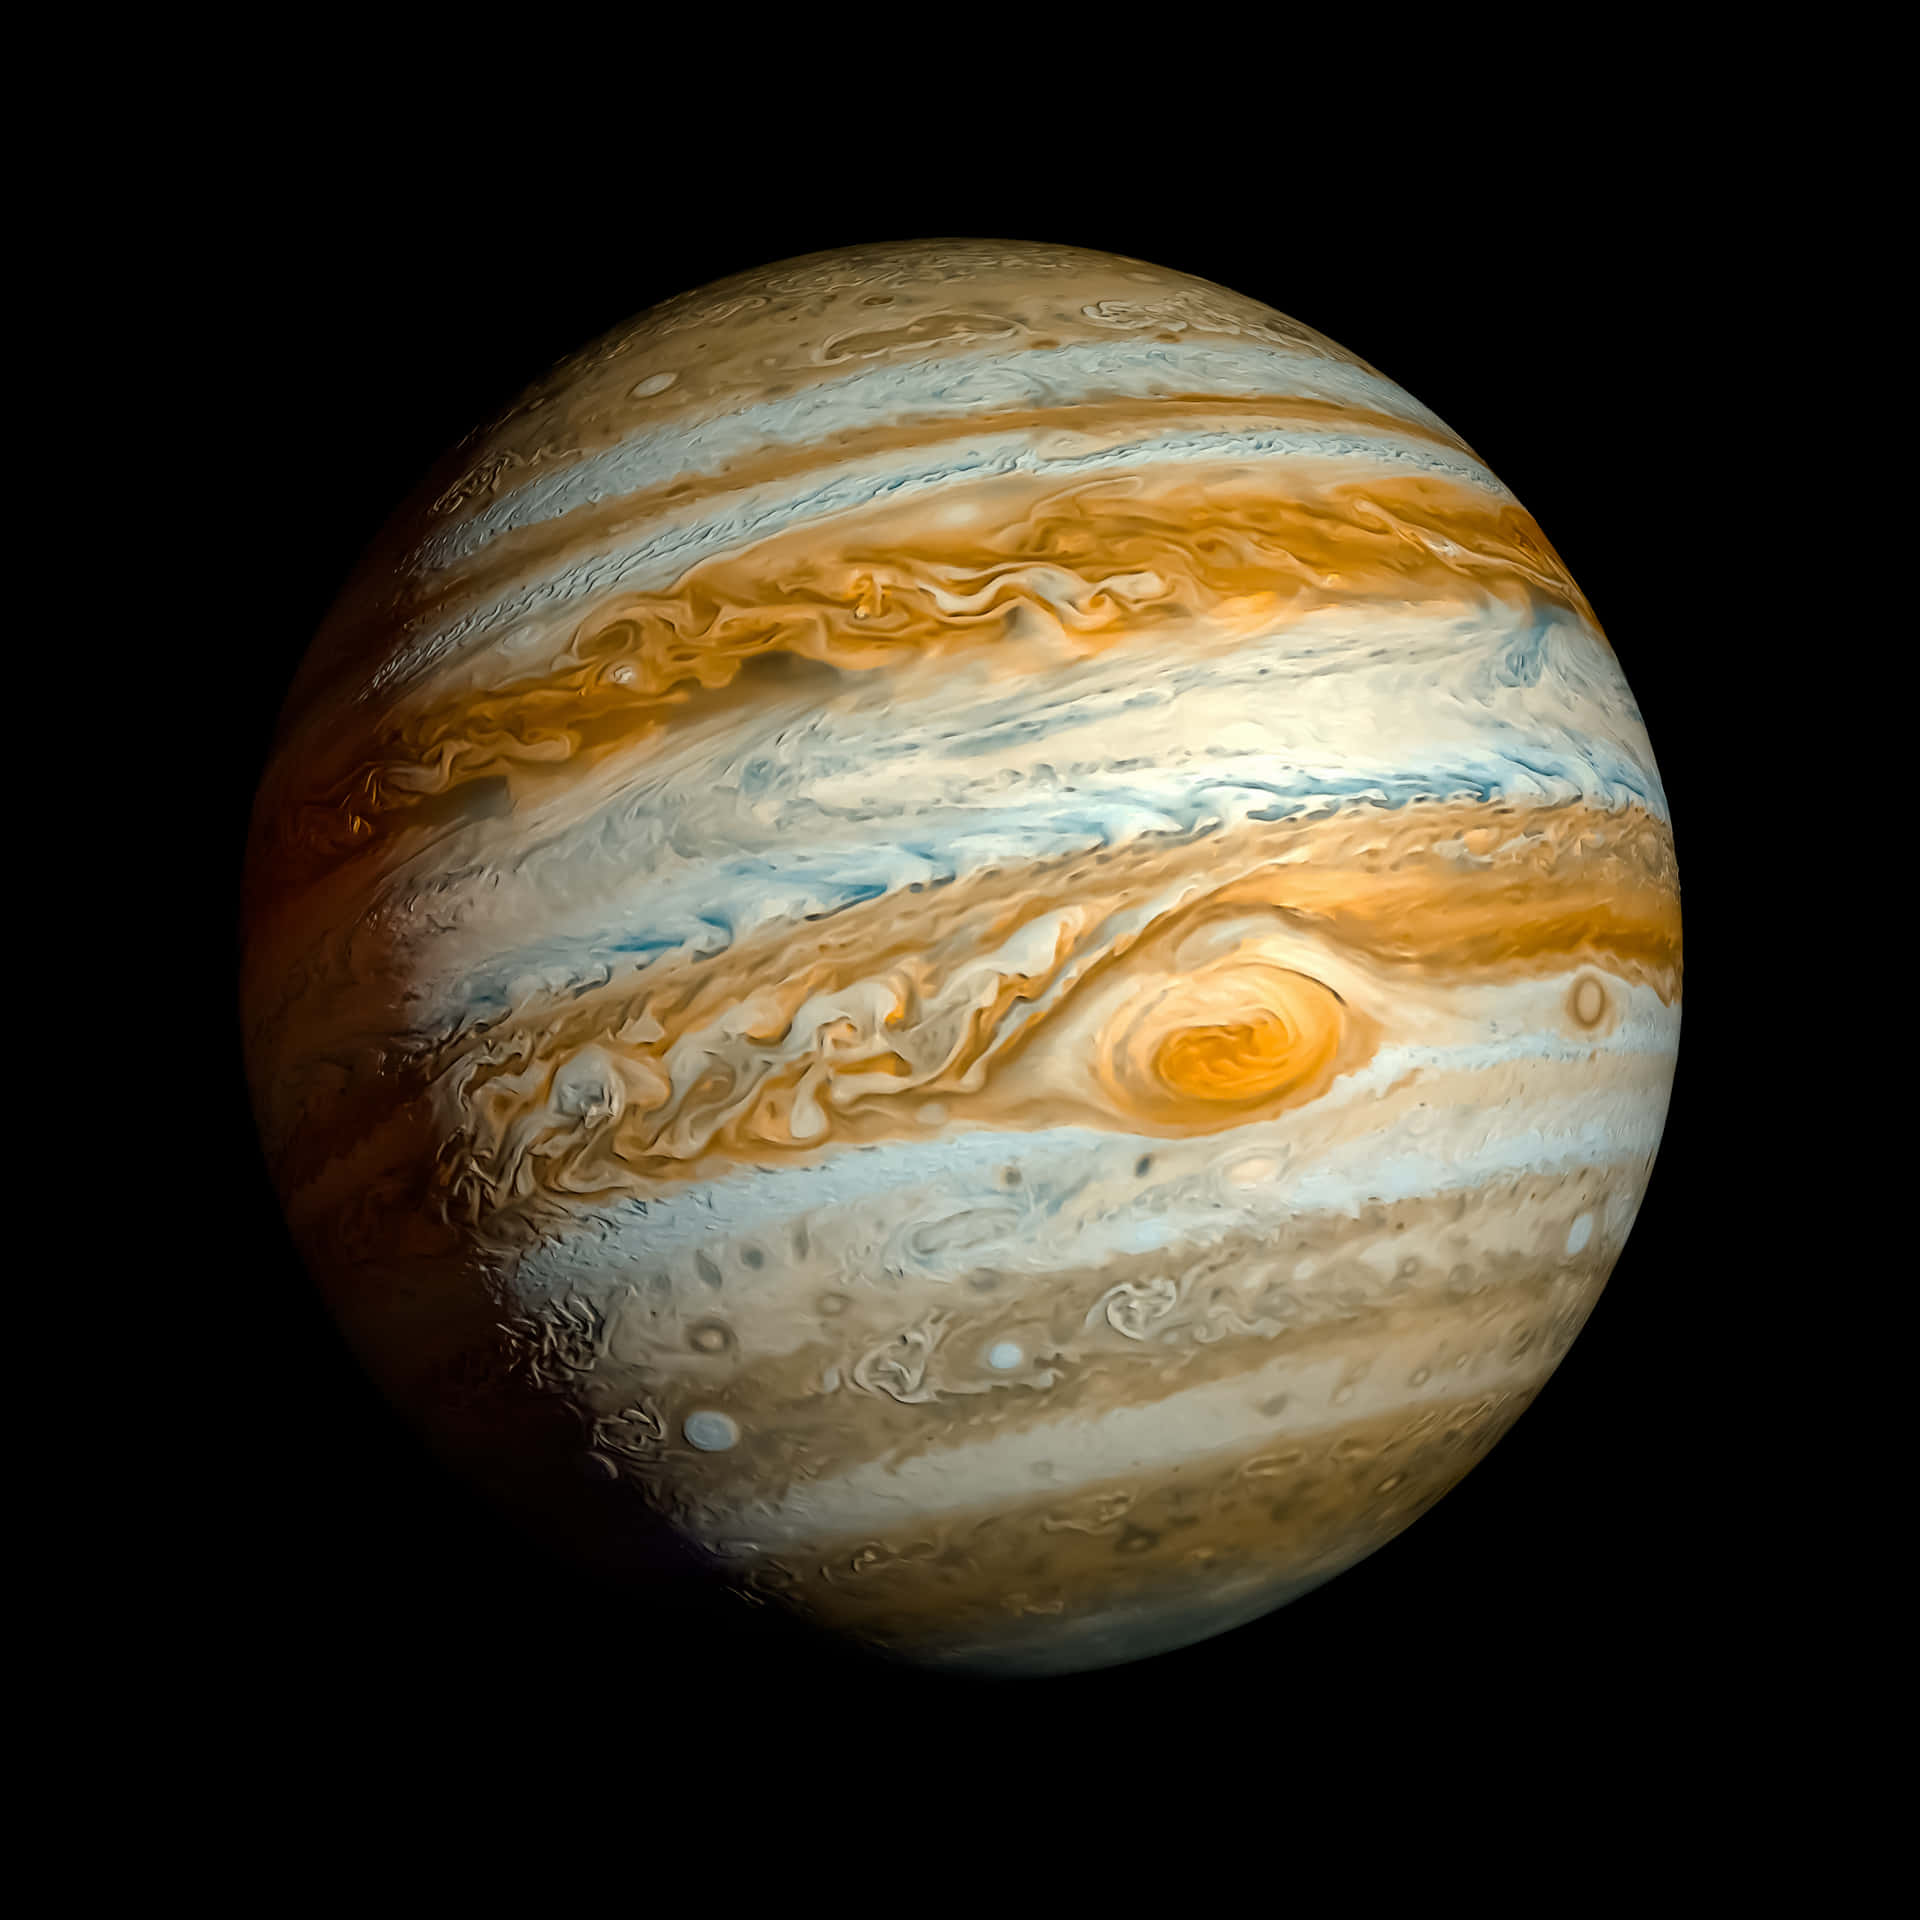 A stunning view of the planet Jupiter.